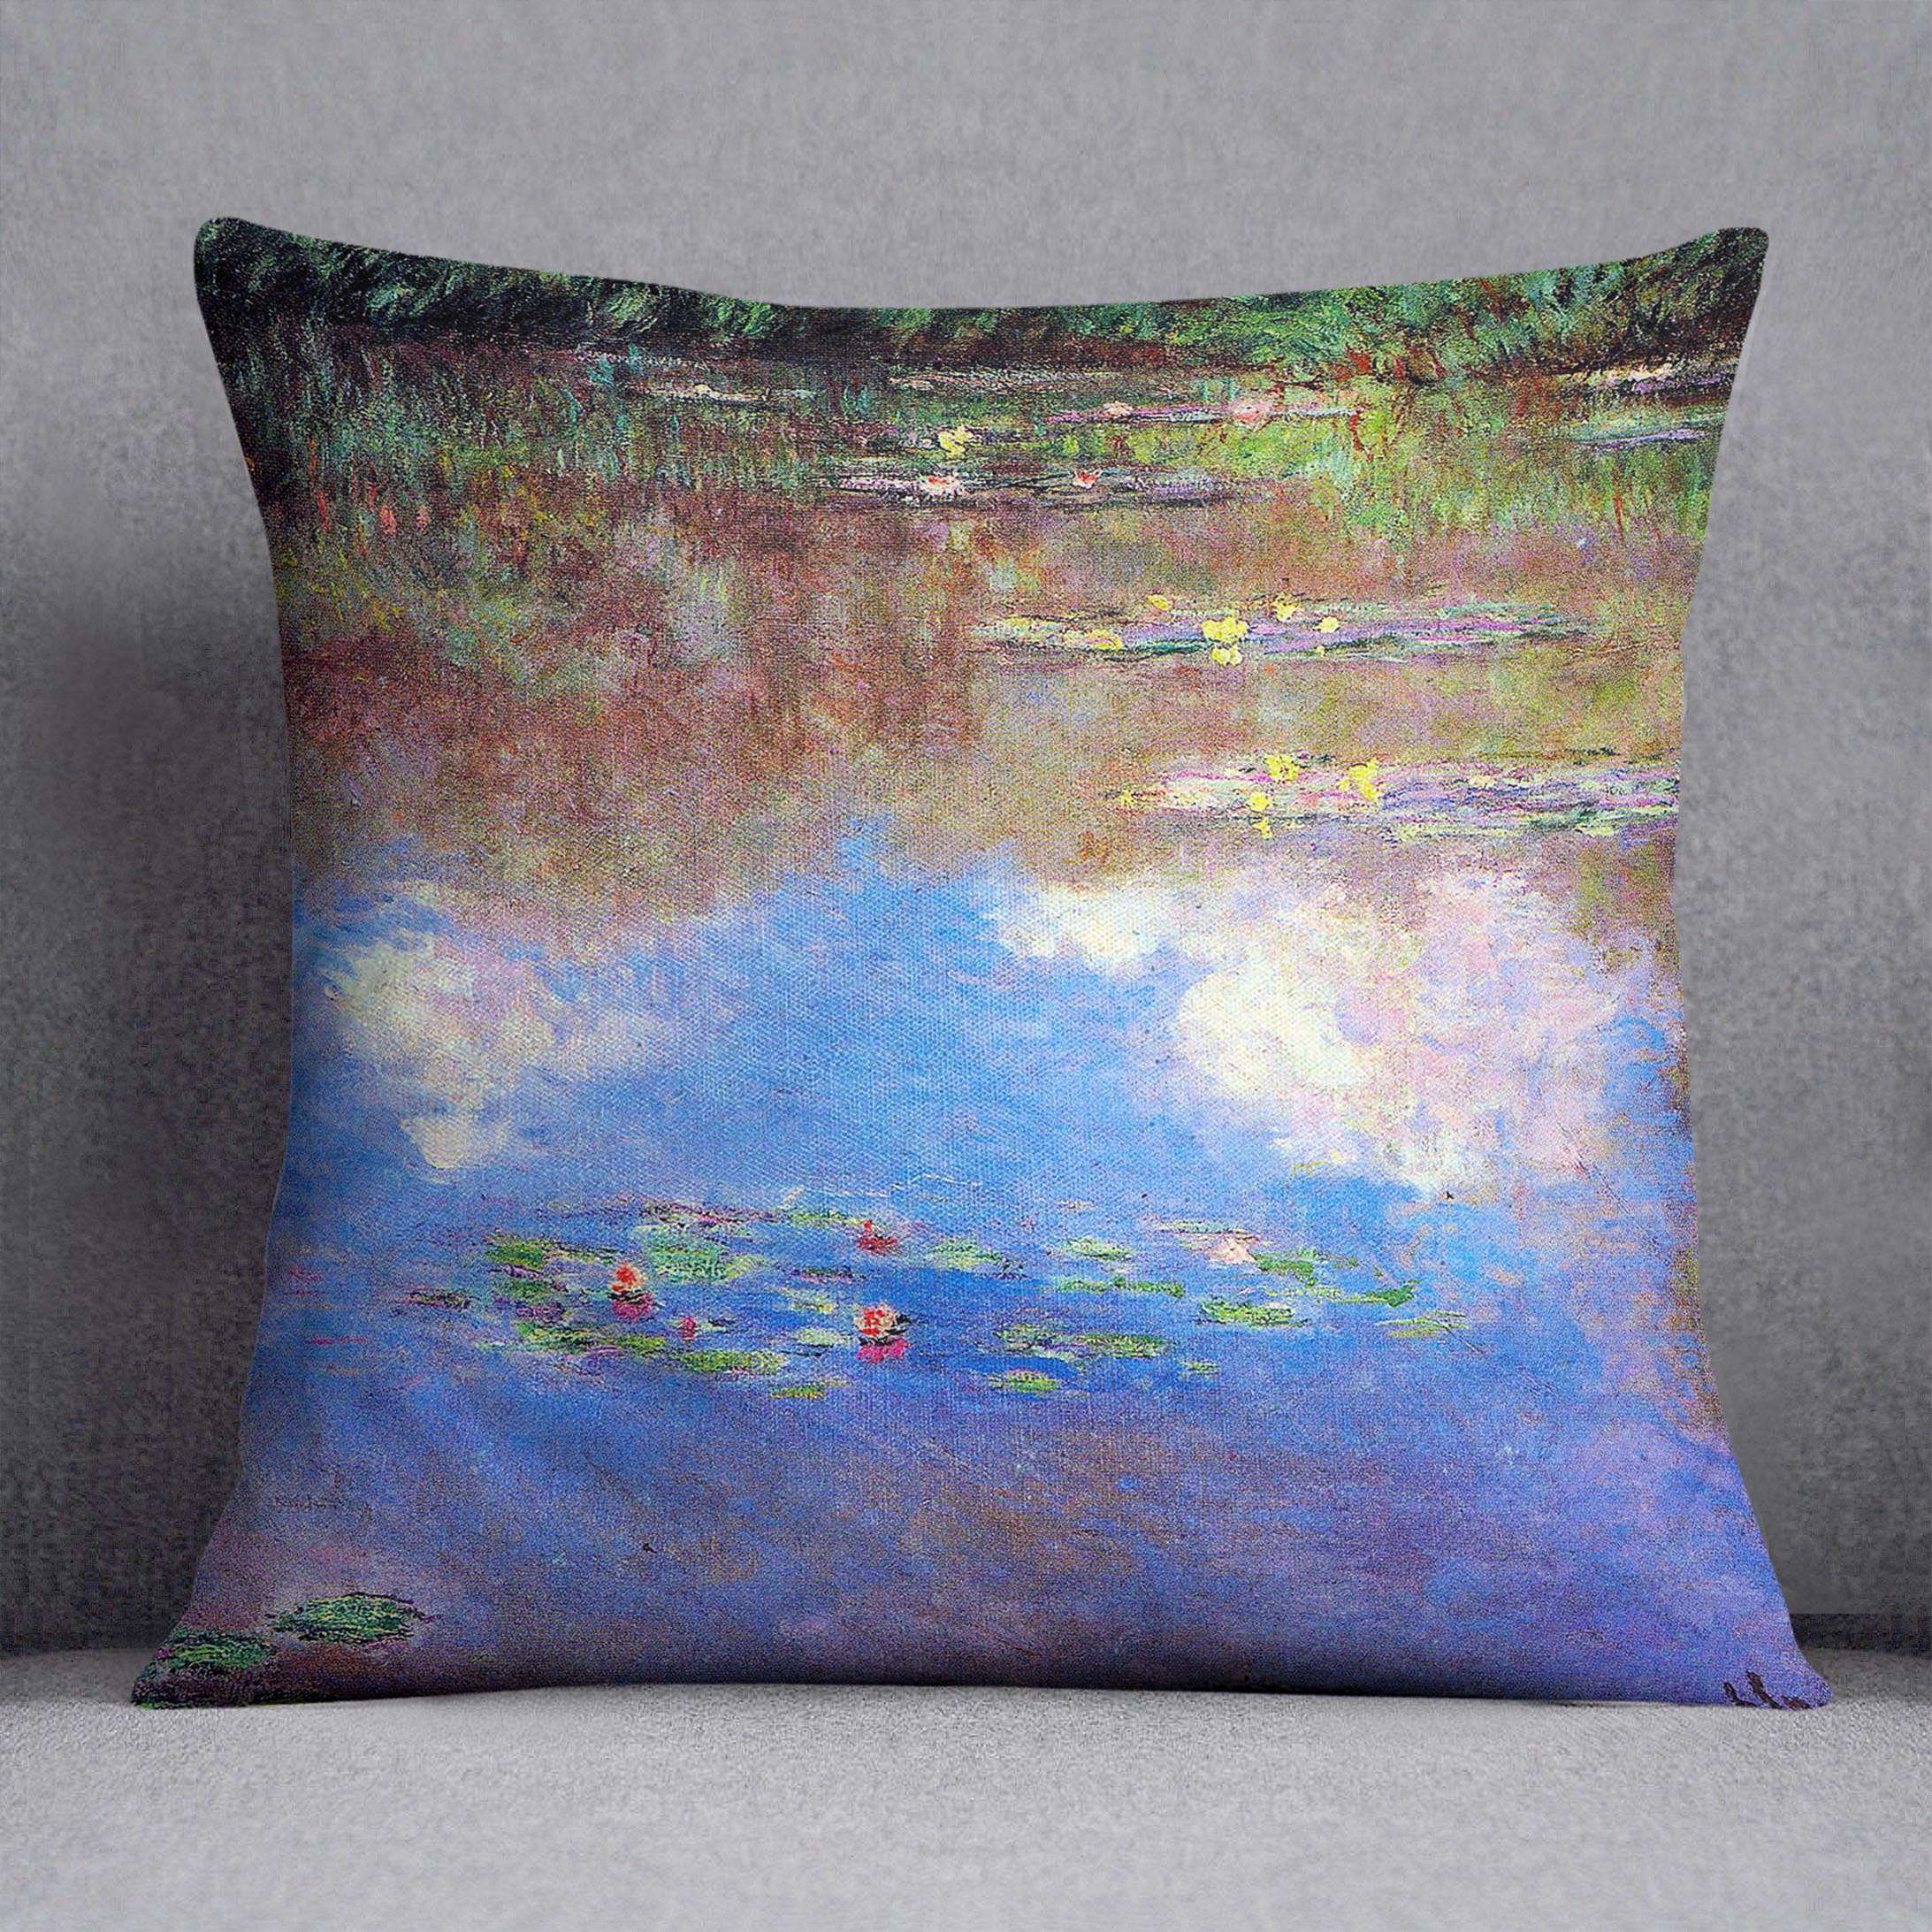 Water Lily Pond 4 by Monet Cushion